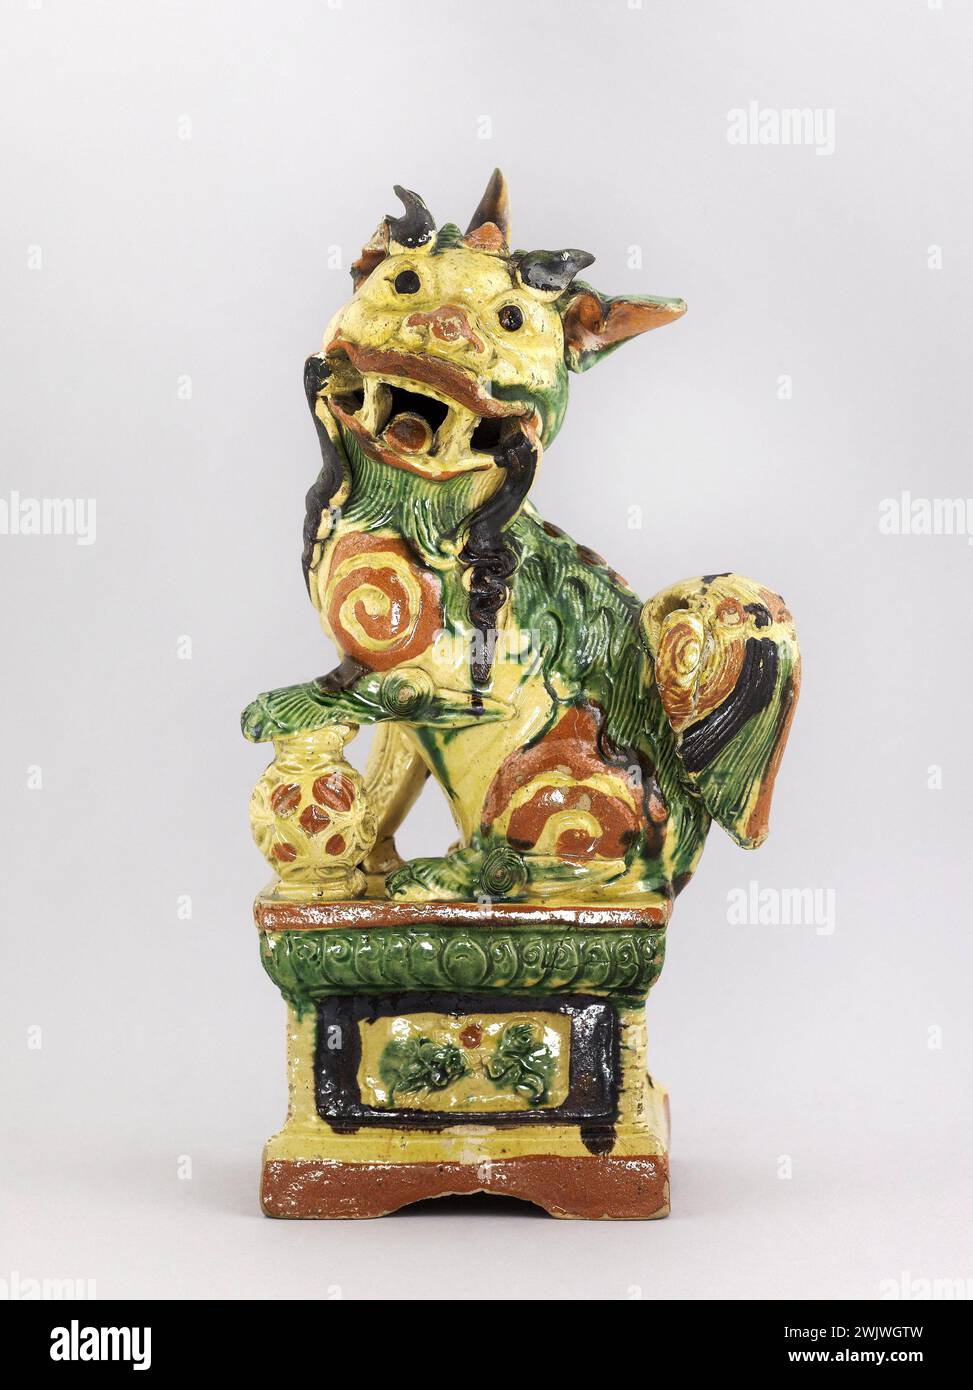 Anonymous. Chinese decor from Juliette Drouet's house in Guernsey, West Wall. Chinese FO dog in earthenware (mismatched). Ceramic. 1750-1850. Paris, house of Victor Hugo. 79112-2 Asian art, decorative arts, Chinese, Ceramic, Chinese dog, Chinese, Decor, Faience, Chinese Salon, Statuette, 19th XIX 19th 19th 19th 19th century, 18th XVIIIth XVIII 18th 18th 18 Stock Photo